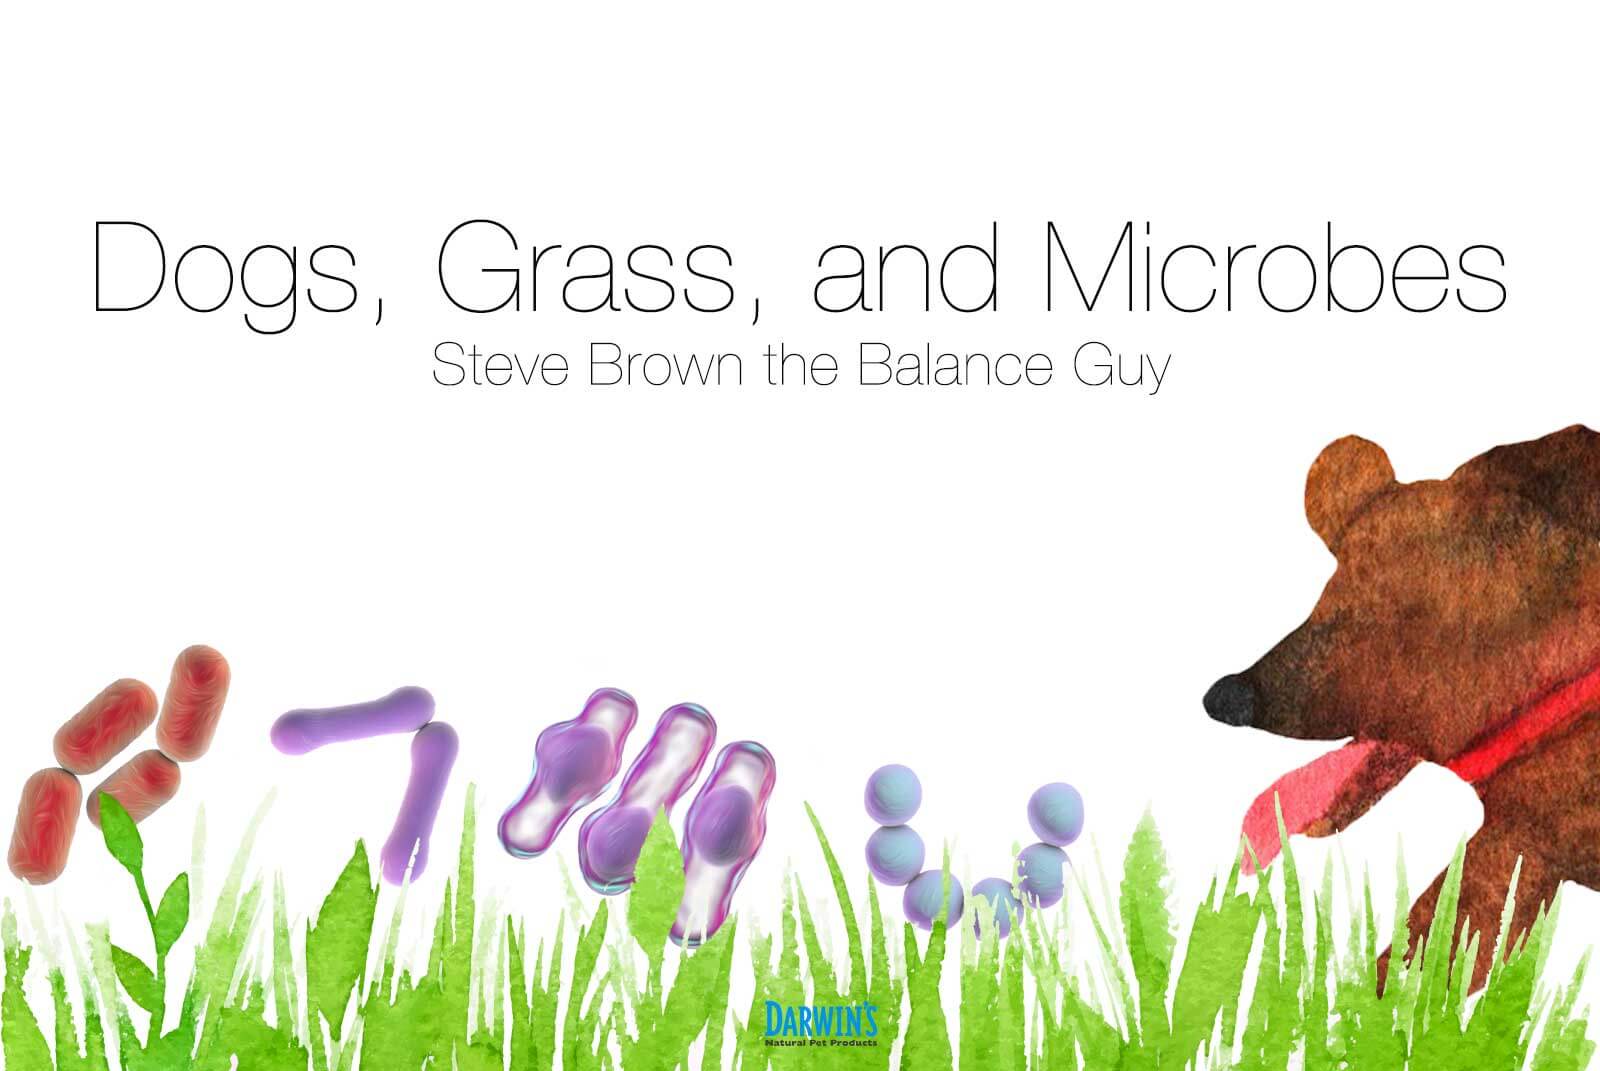 Dogs, Grass, and Microbes